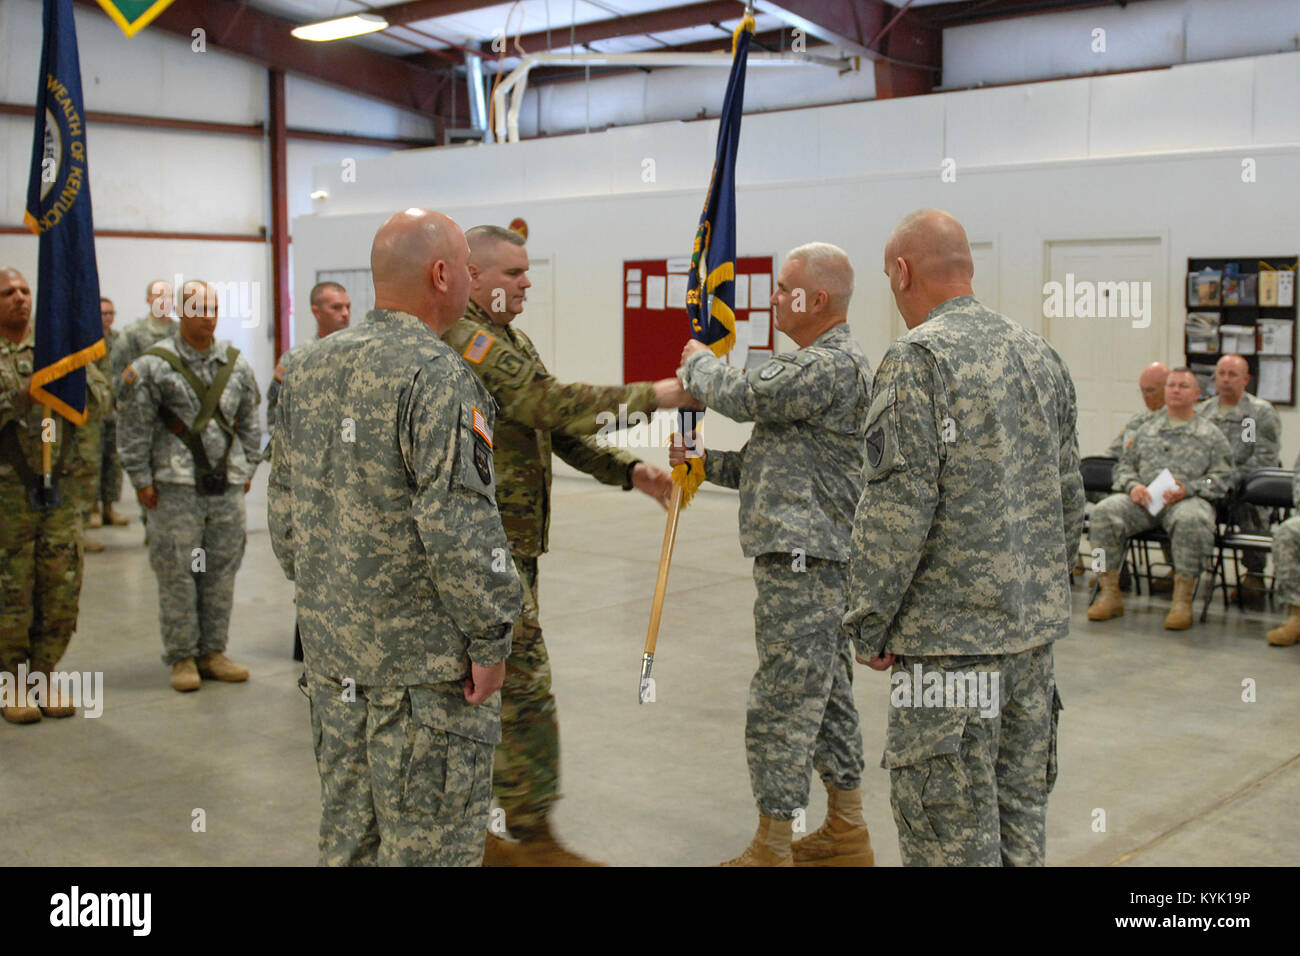 Col. Jeff Casada takes charge of the 238th Regiment during a change of command ceremony at the Wendell H. Ford Regional Training Center in Greenville, Ky., Aug. 20, 2016. (U.S. Army National Guard photo by 1st Lt. Michael Reinersman) Stock Photo